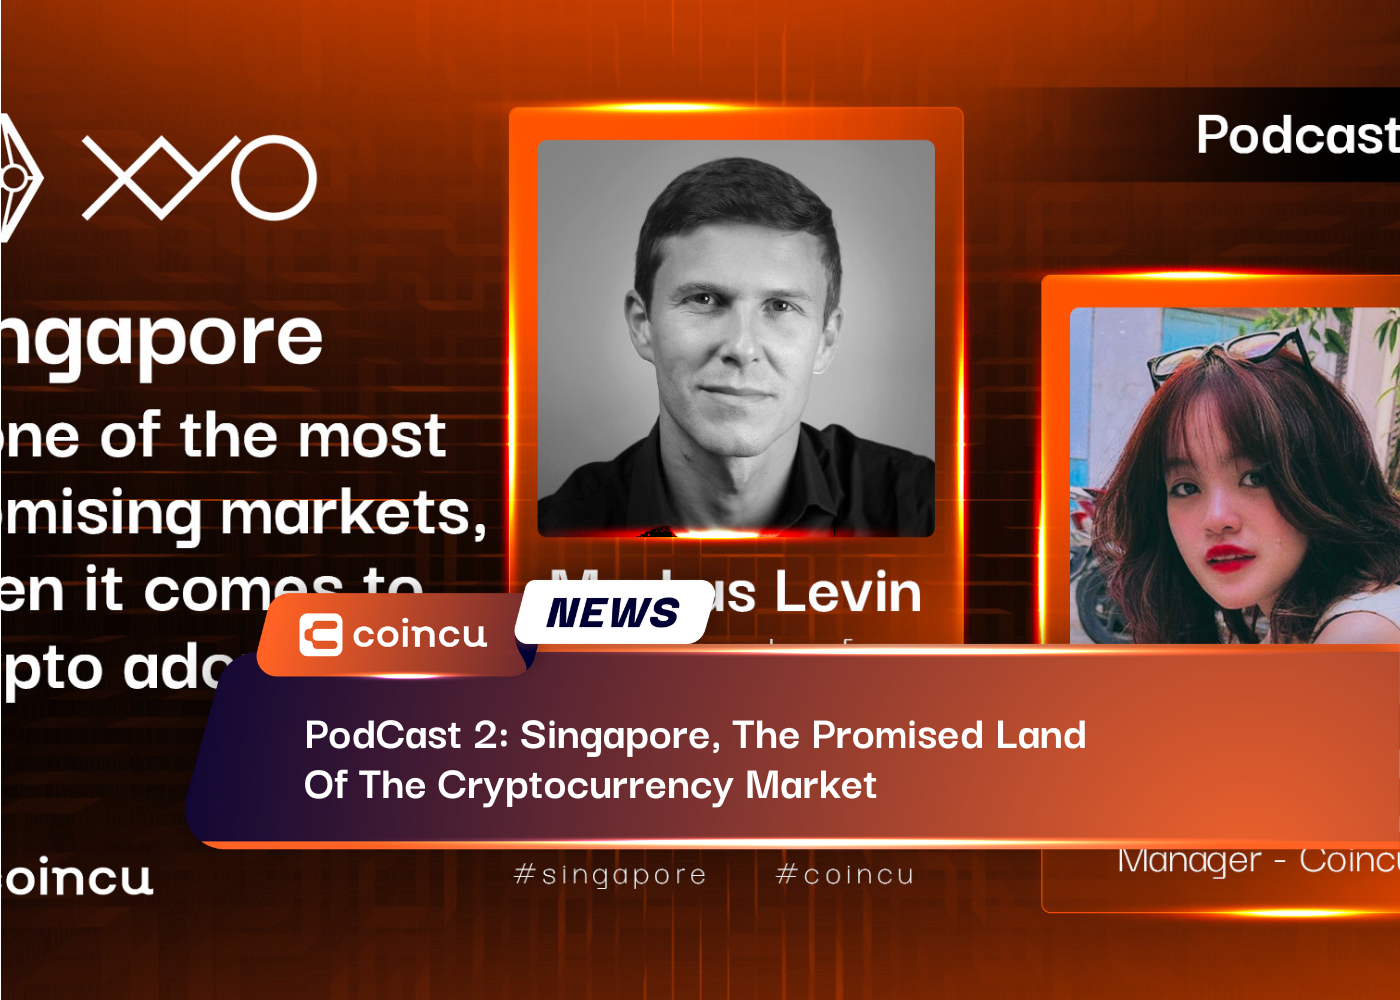 PodCast 2: Singapore, The Promised Land Of The Cryptocurrency Market